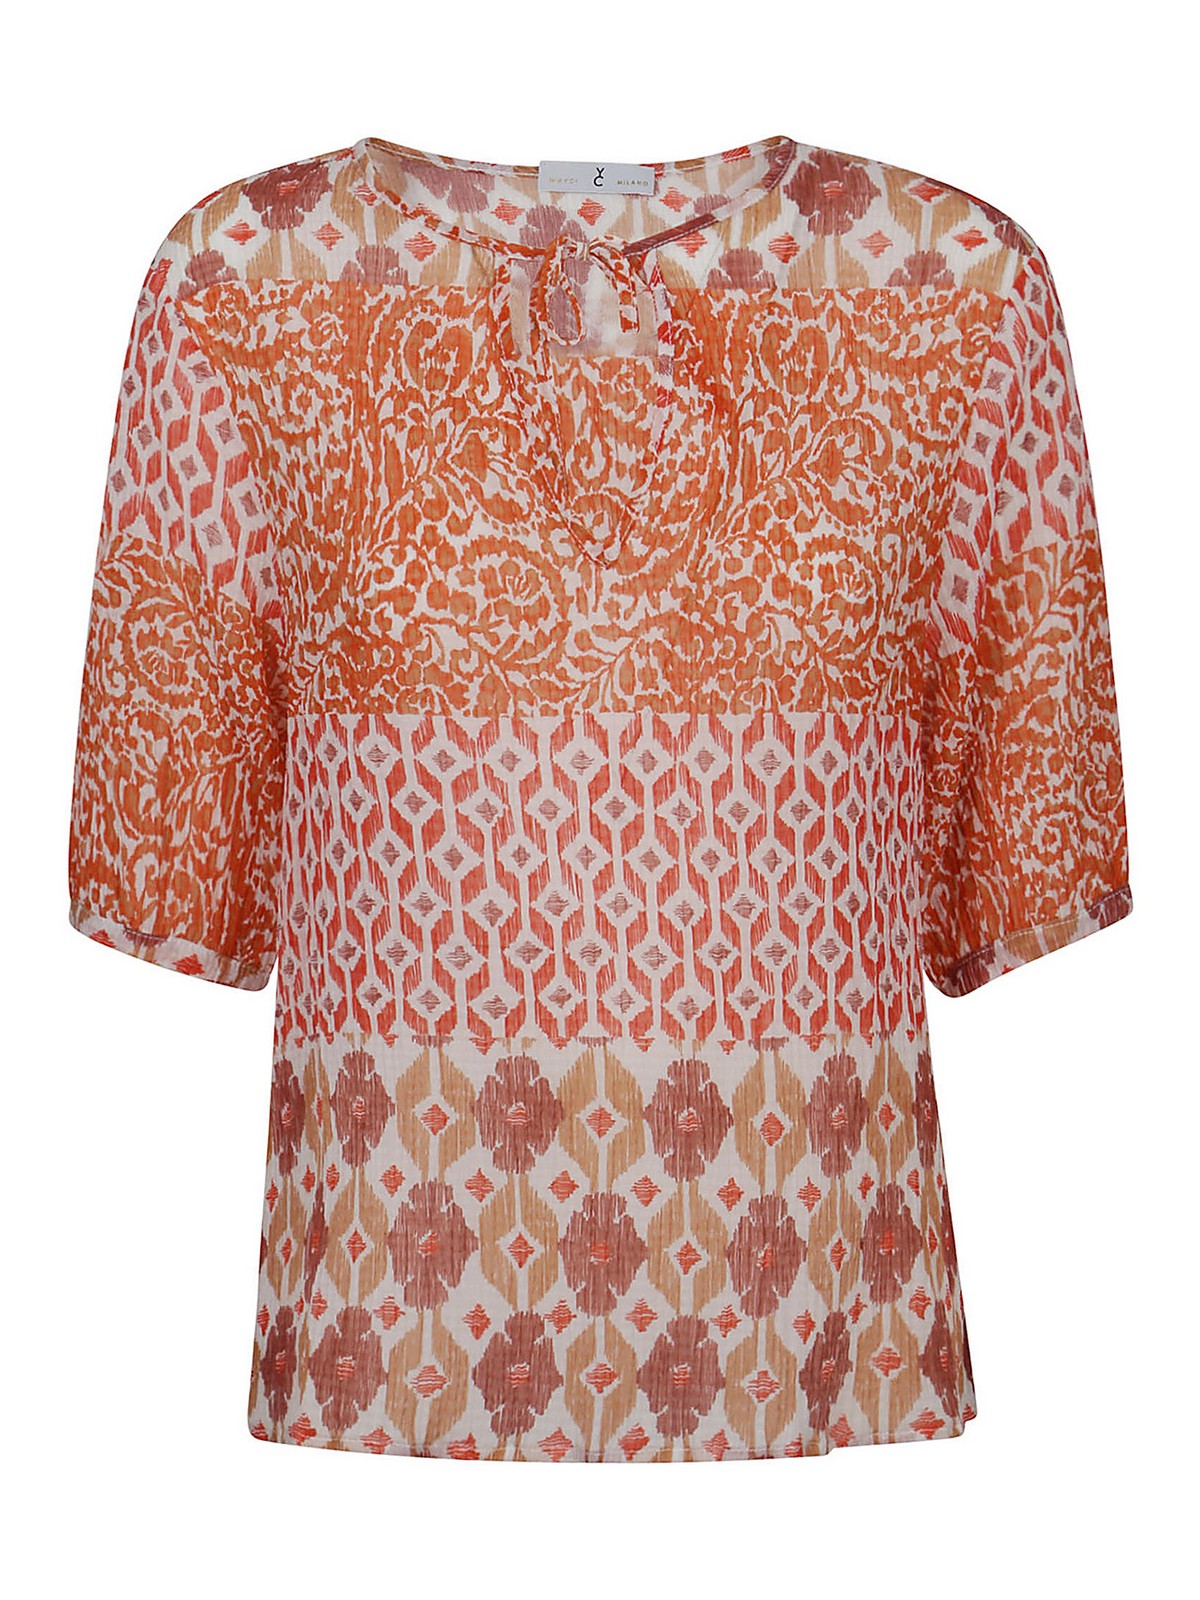 Whyci Patterned Blouse In Brown